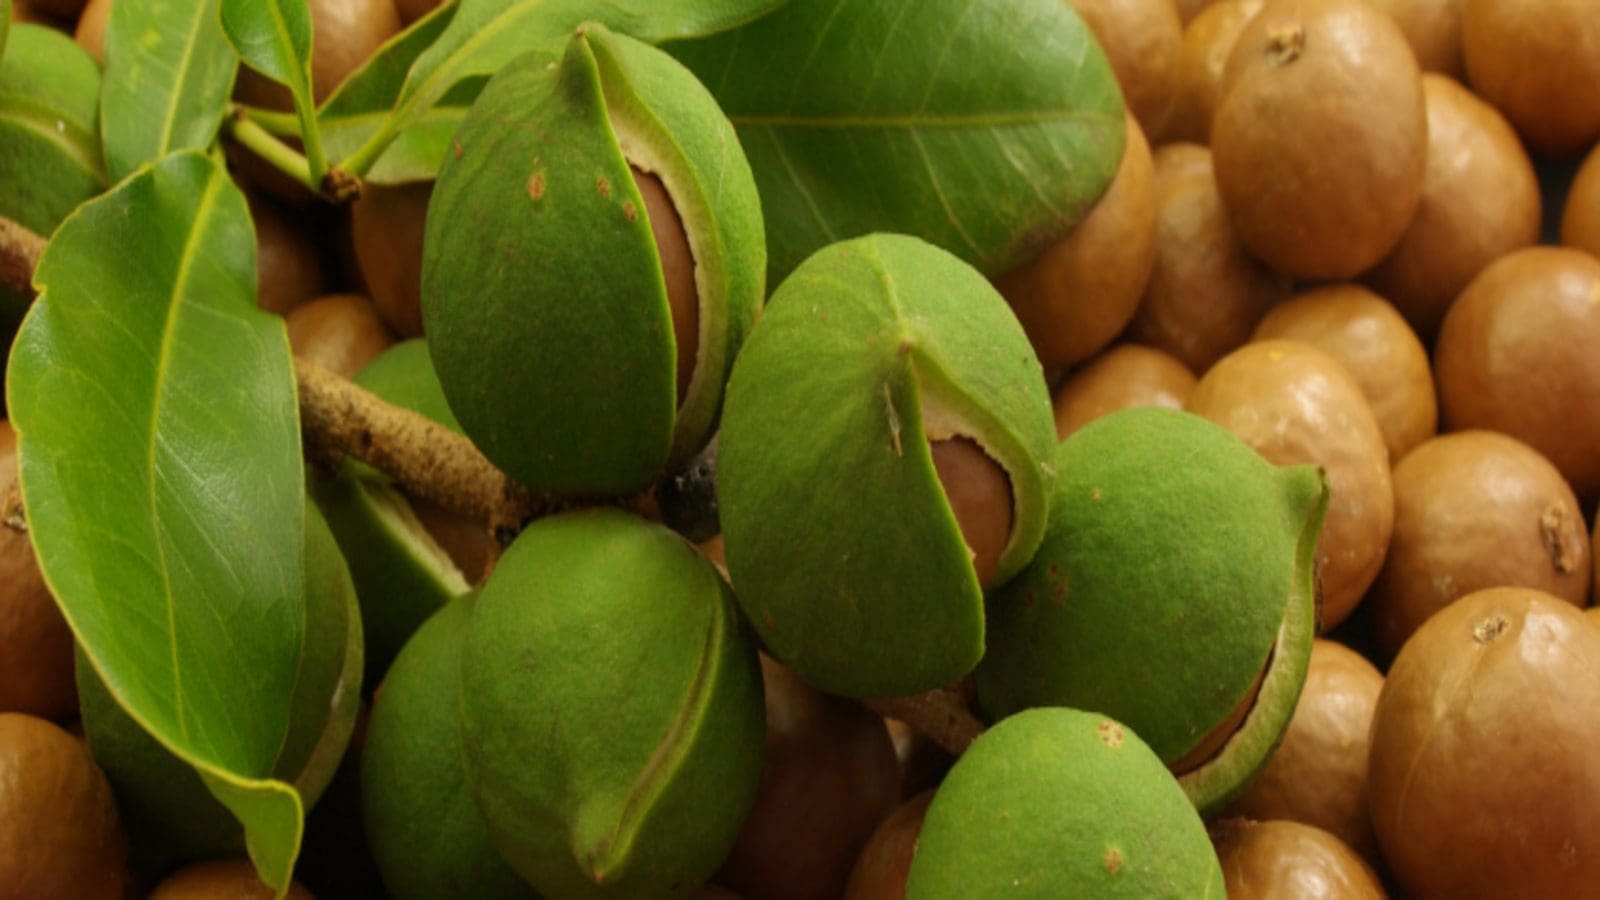 Government seeks unconventional macadamia uses to boost farmers’ earning